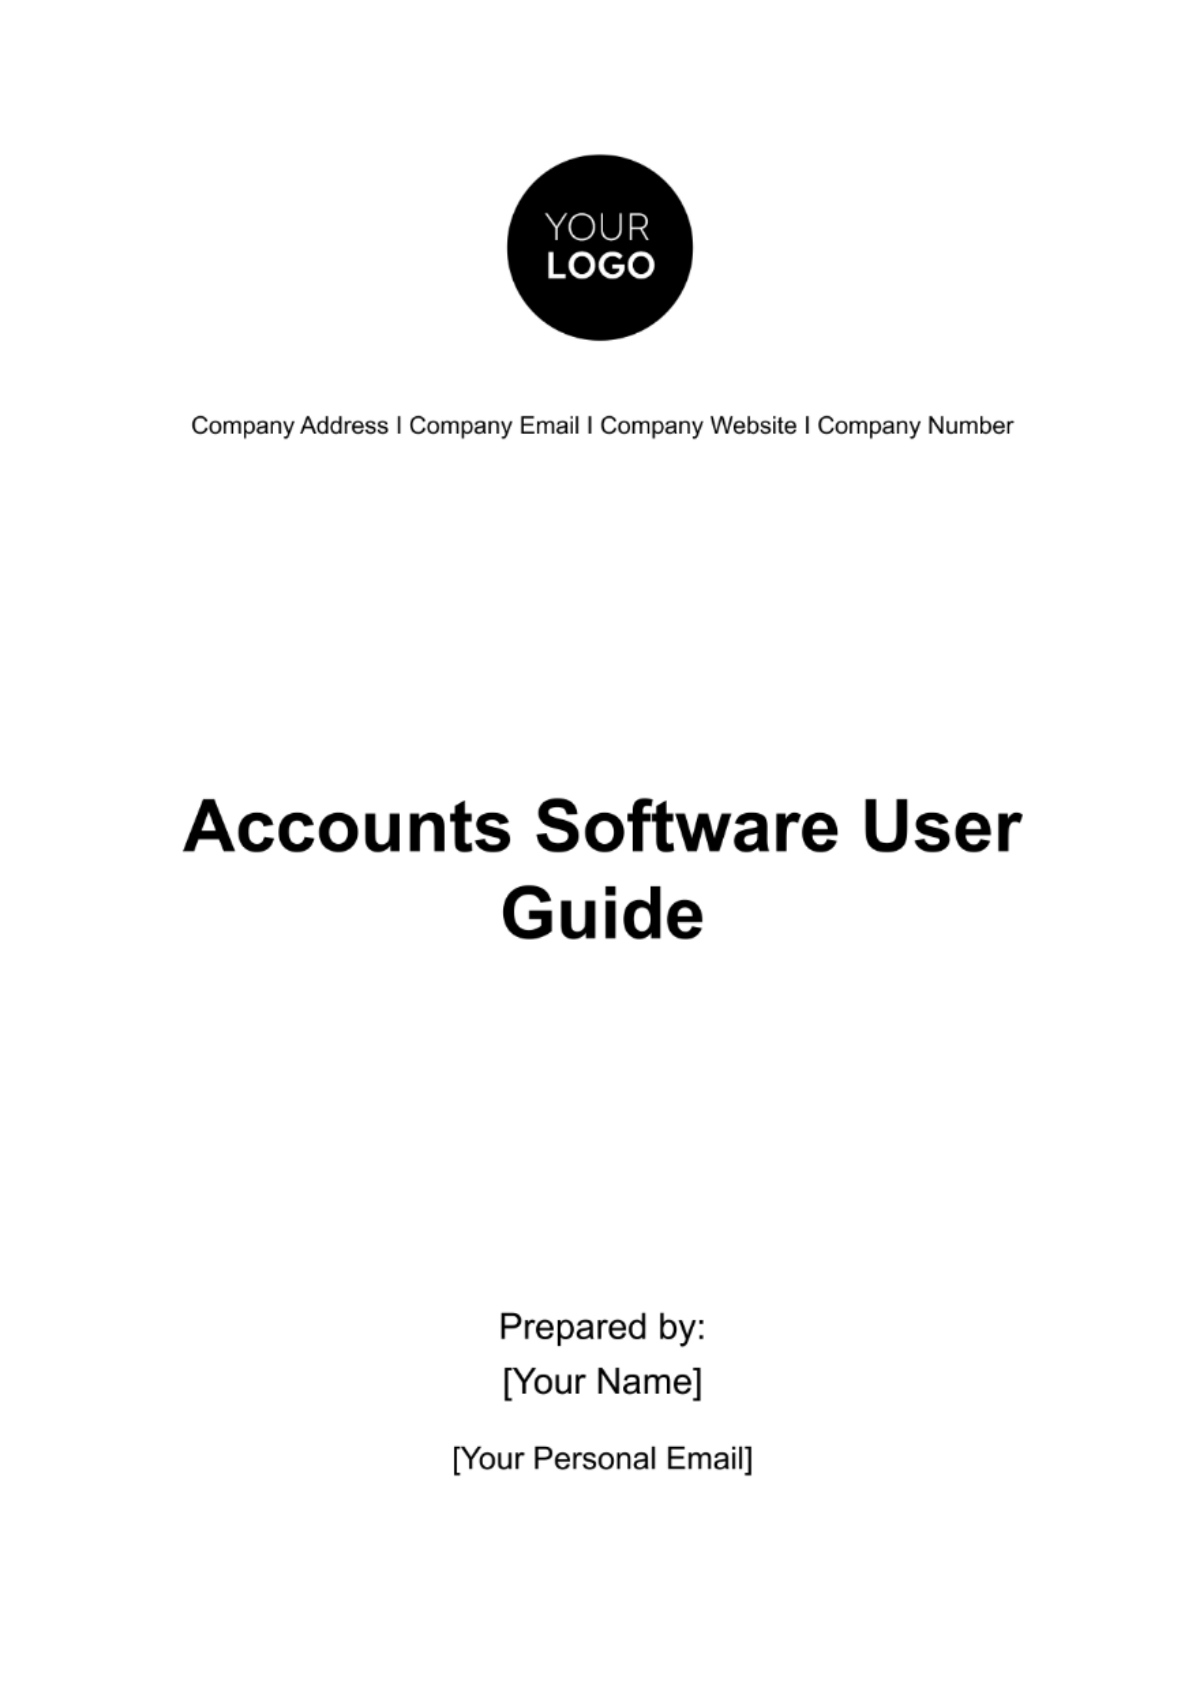 Accounts Software User Guide Template